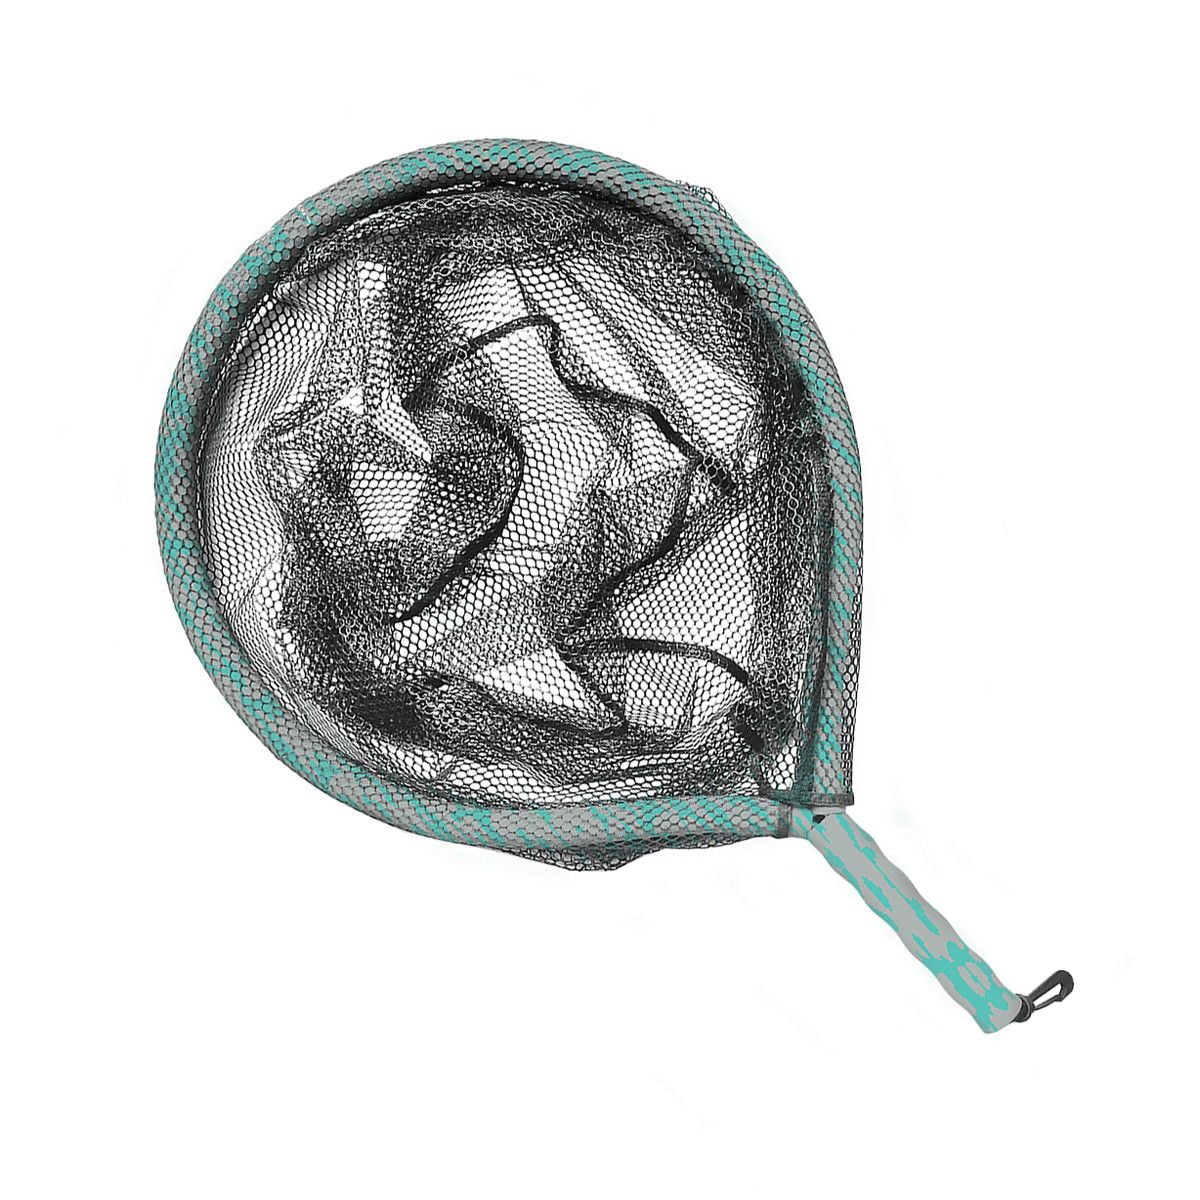 Danco Sports Floating Net with Elastic Lanyard, 30, Gray and